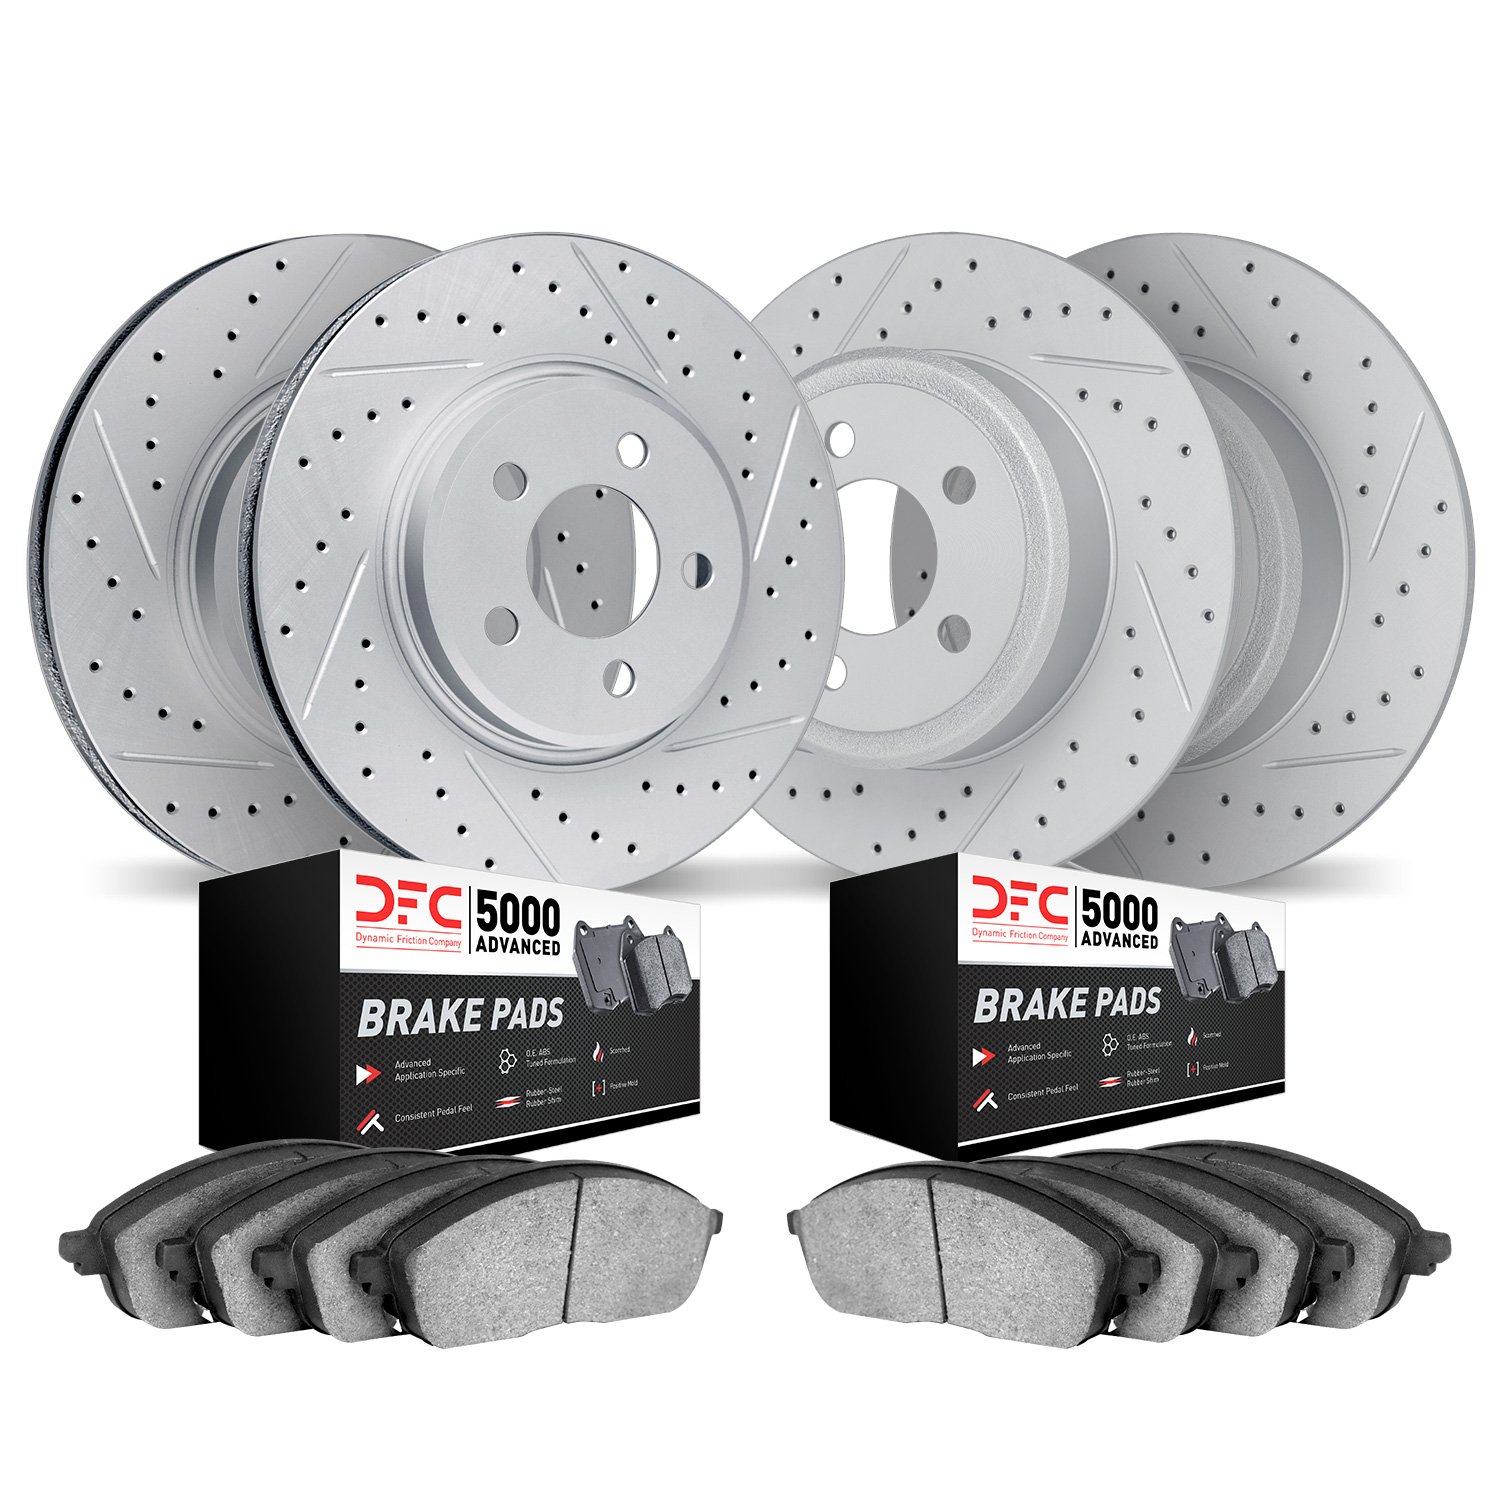 2504-74025 Geoperformance Drilled/Slotted Rotors w/5000 Advanced Brake Pads Kit, 2005-2013 Audi/Volkswagen, Position: Front and